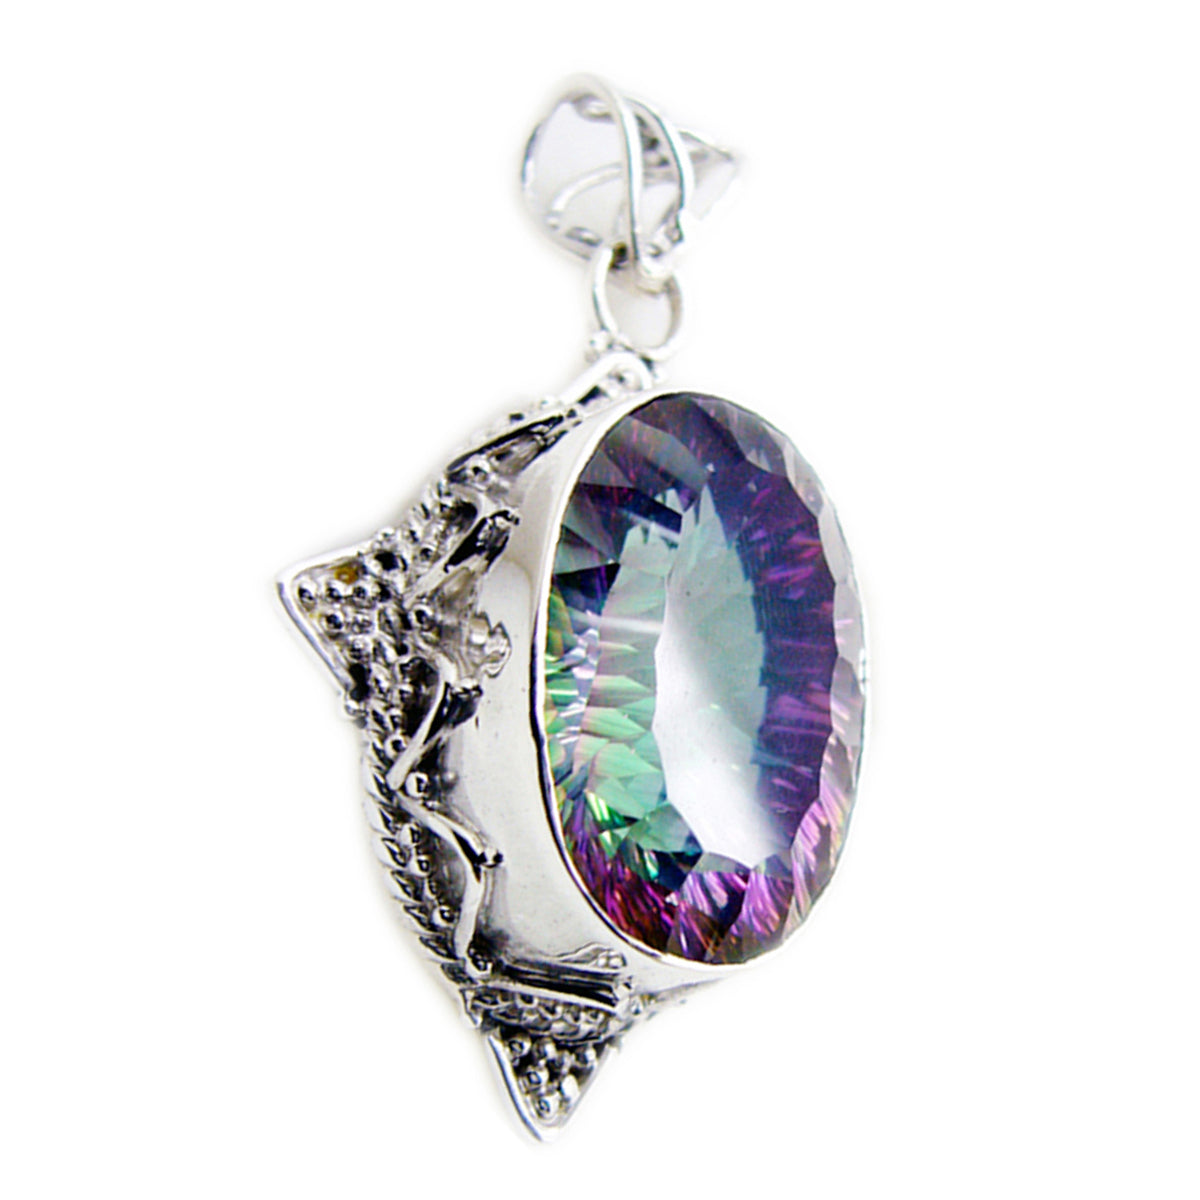 Riyo Irresistible Gemstone Oval Faceted Multi Color Mystic Quartz 1177 Sterling Silver Pendant Gift For Birthday